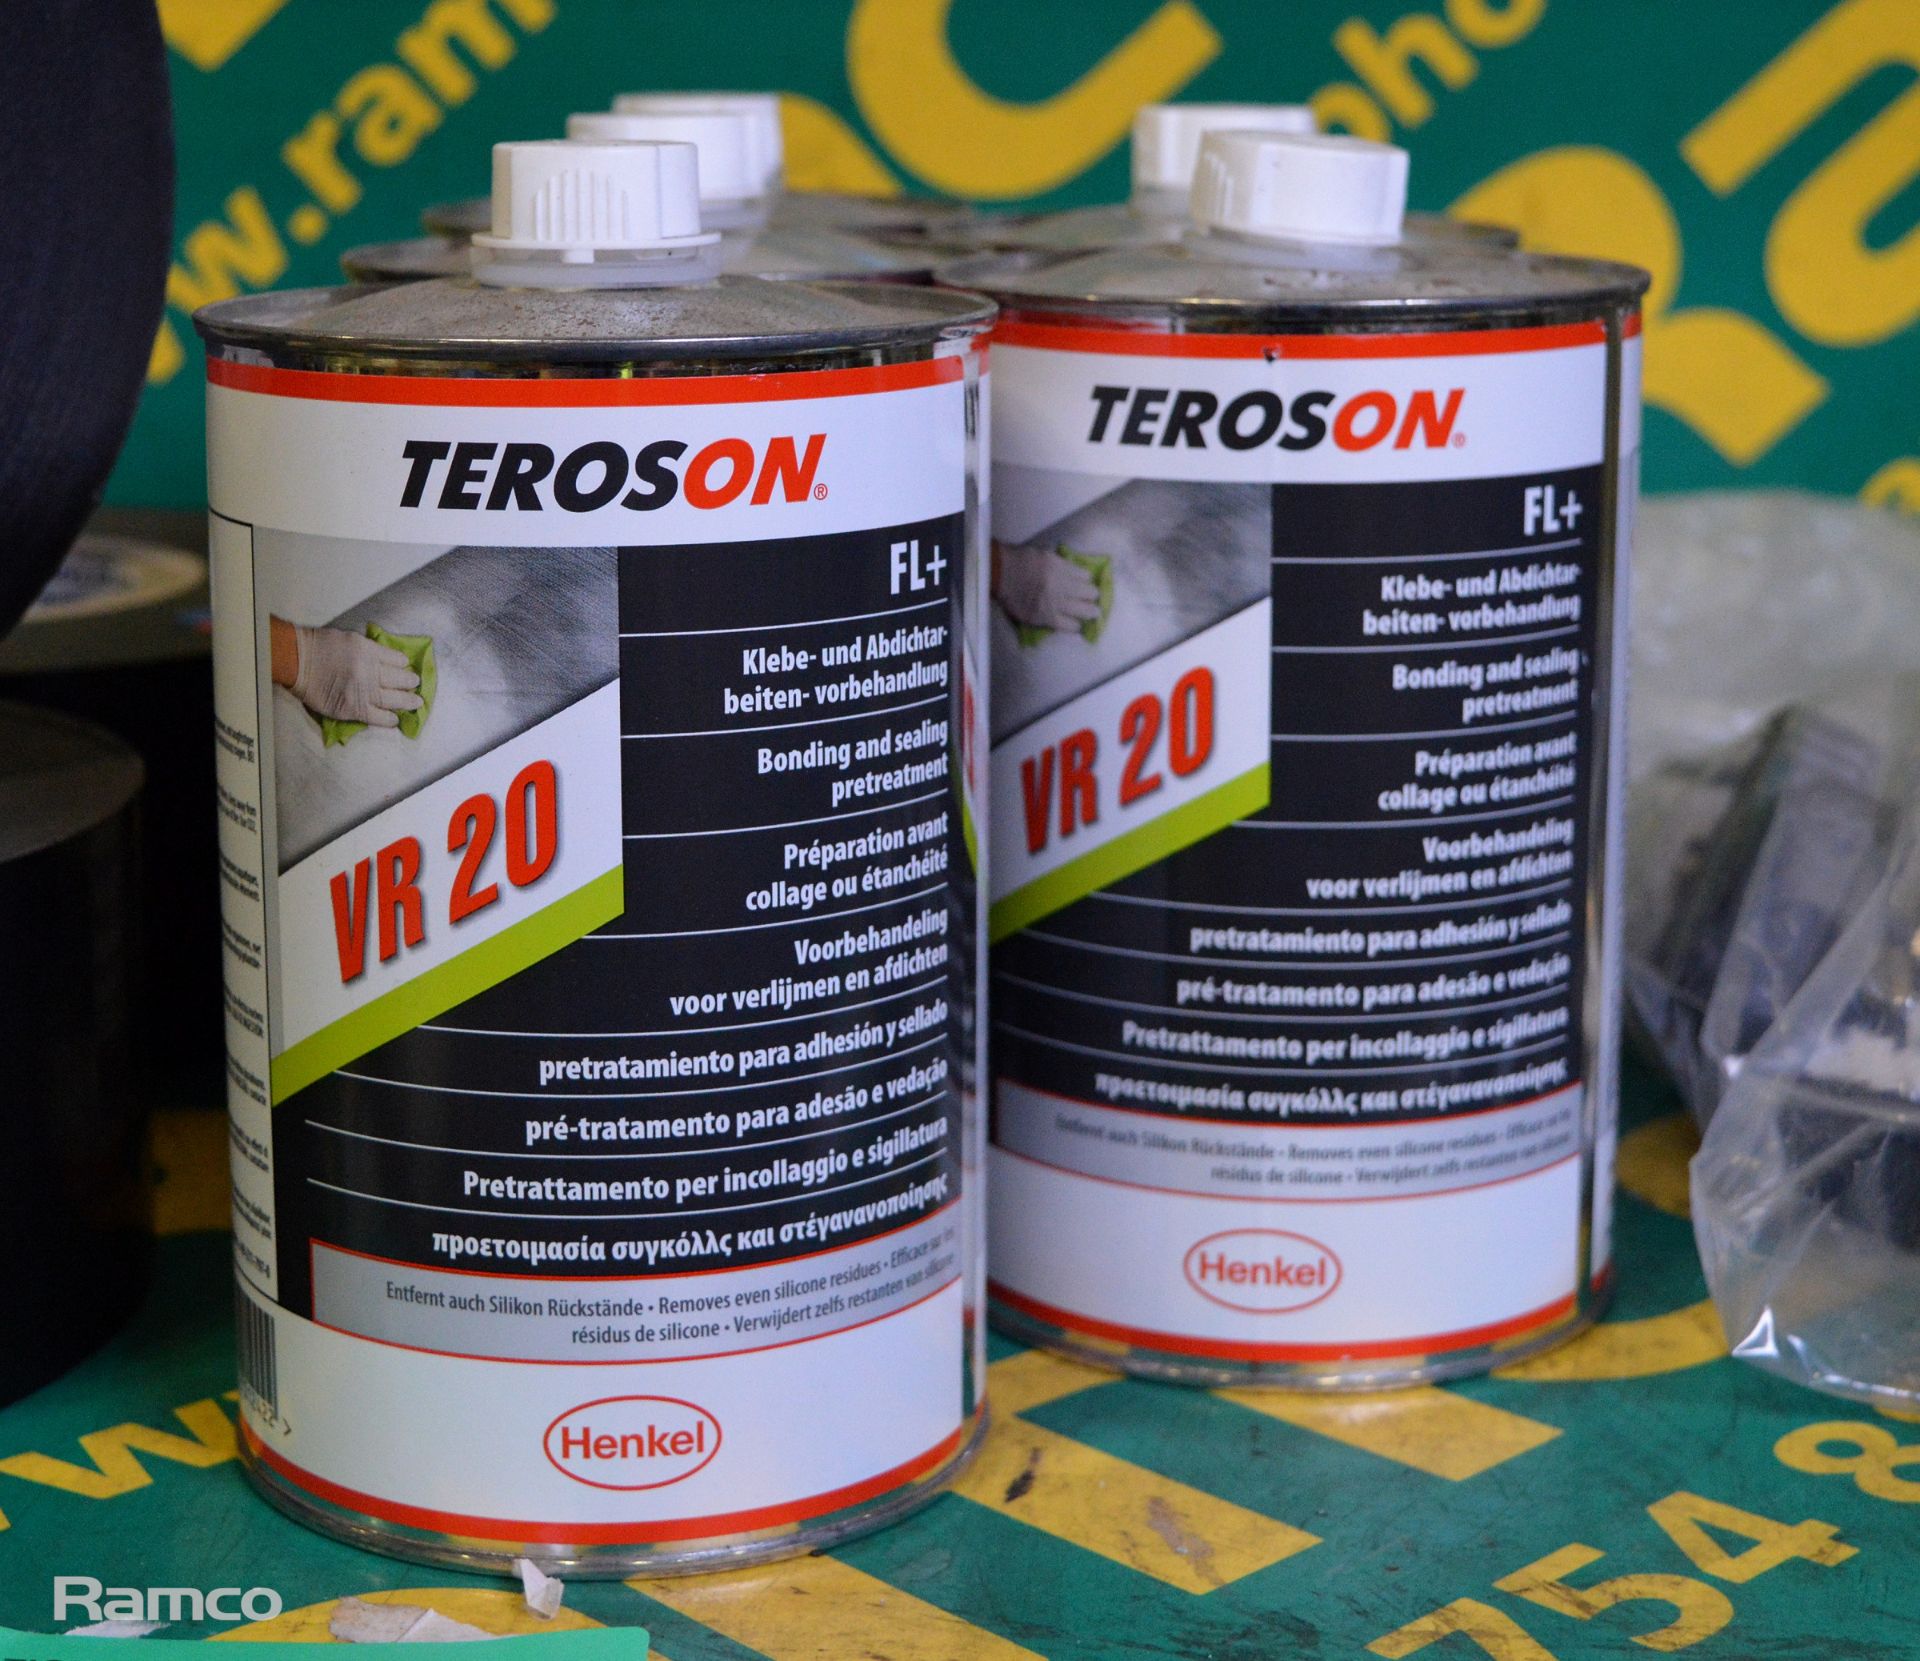 3x Nitto Tape rolls, 5x Teroson VR20 pretreatment, Permaplugs, various work gloves - Image 5 of 6